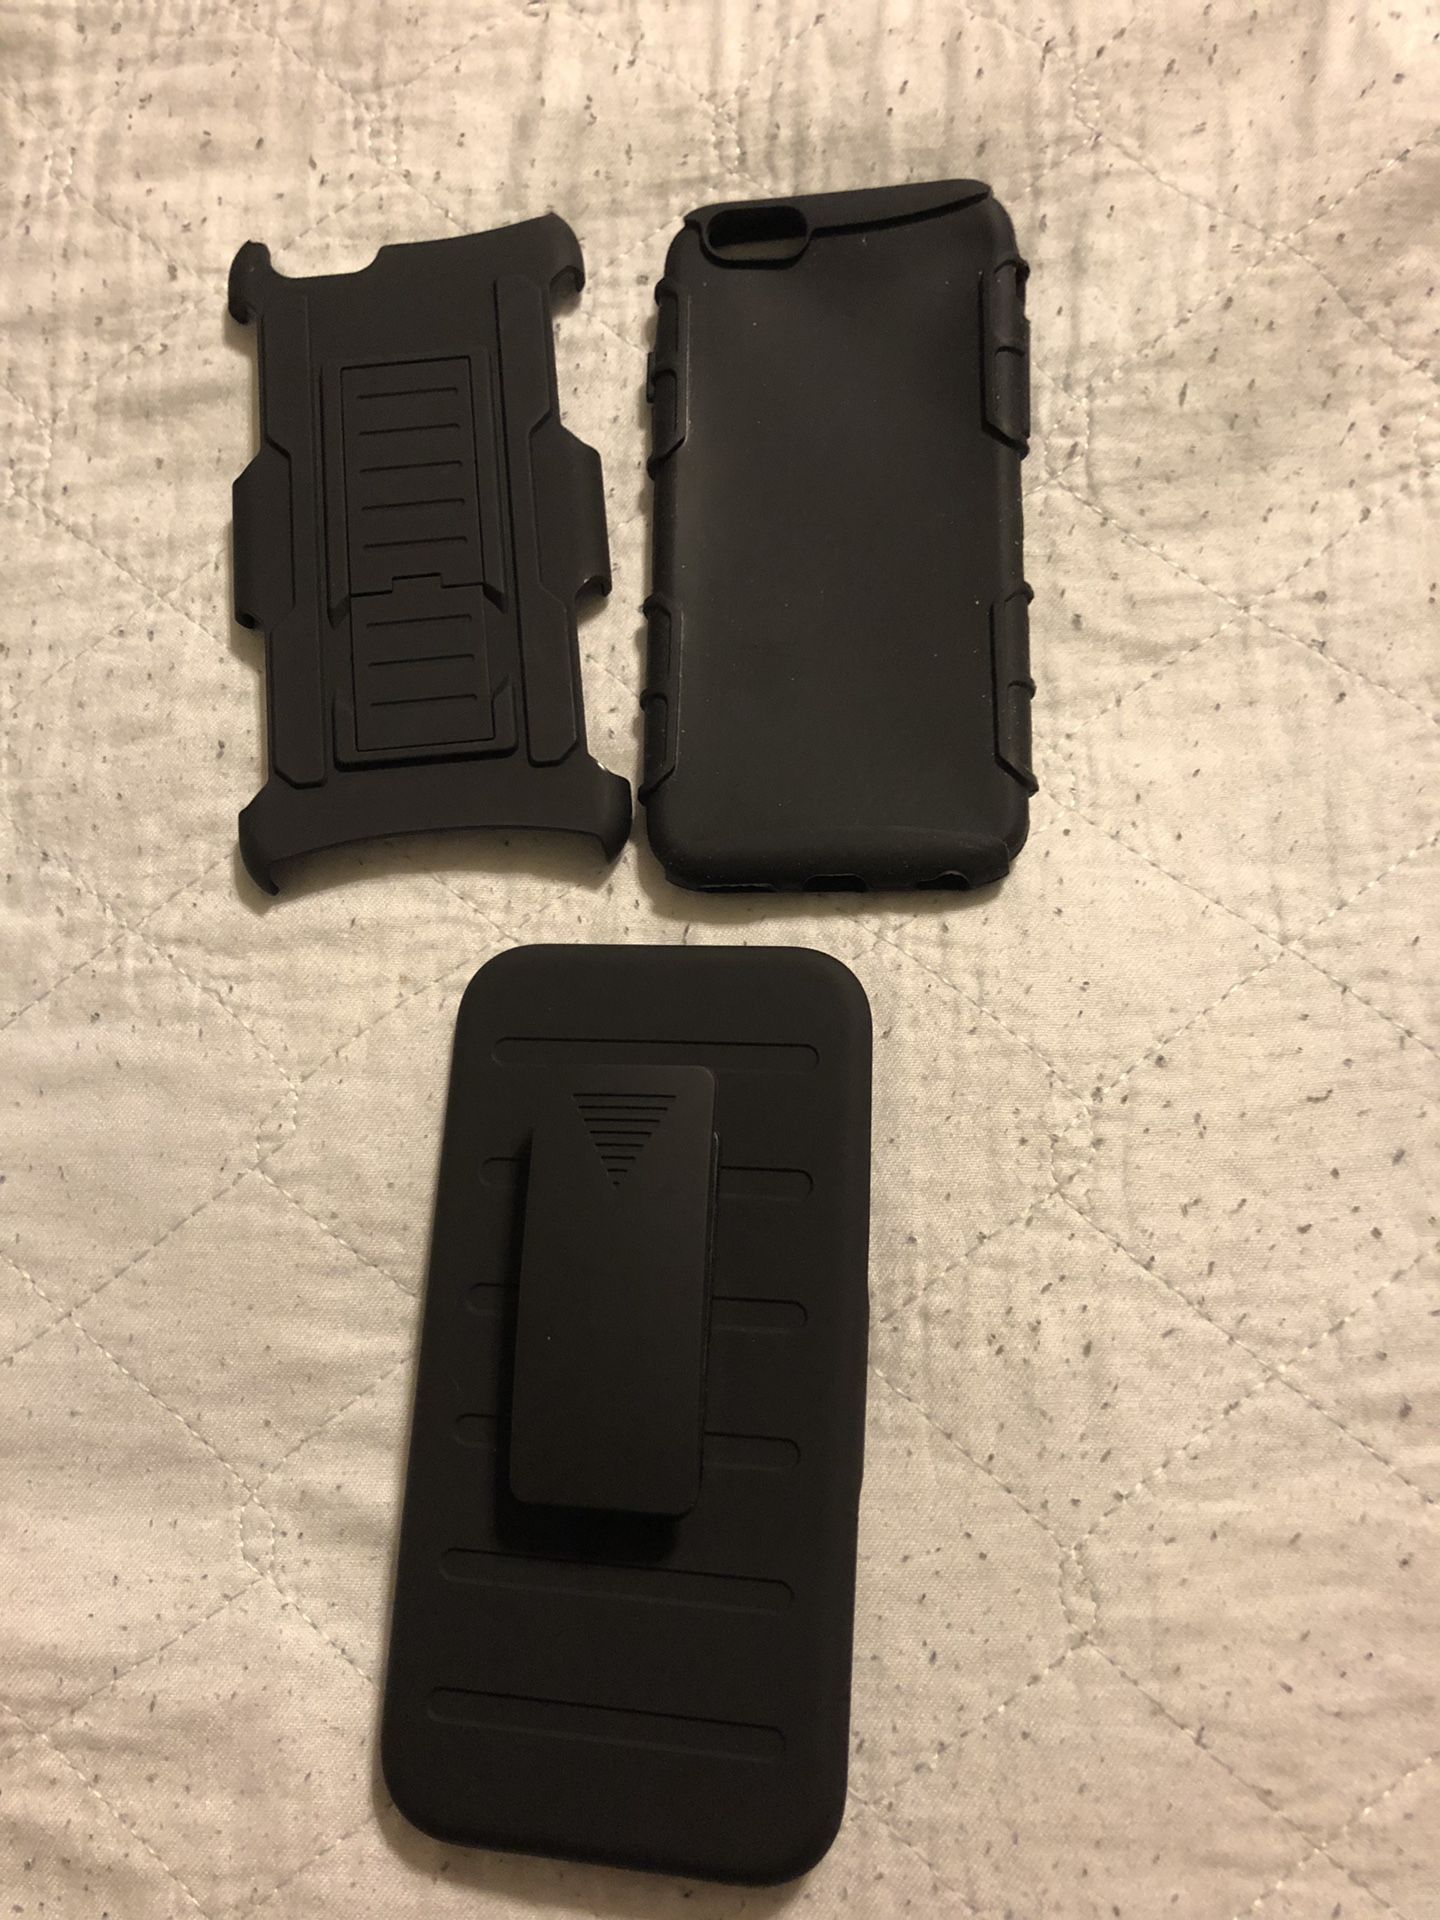 3 piece iPhone 6 case with holster with stand